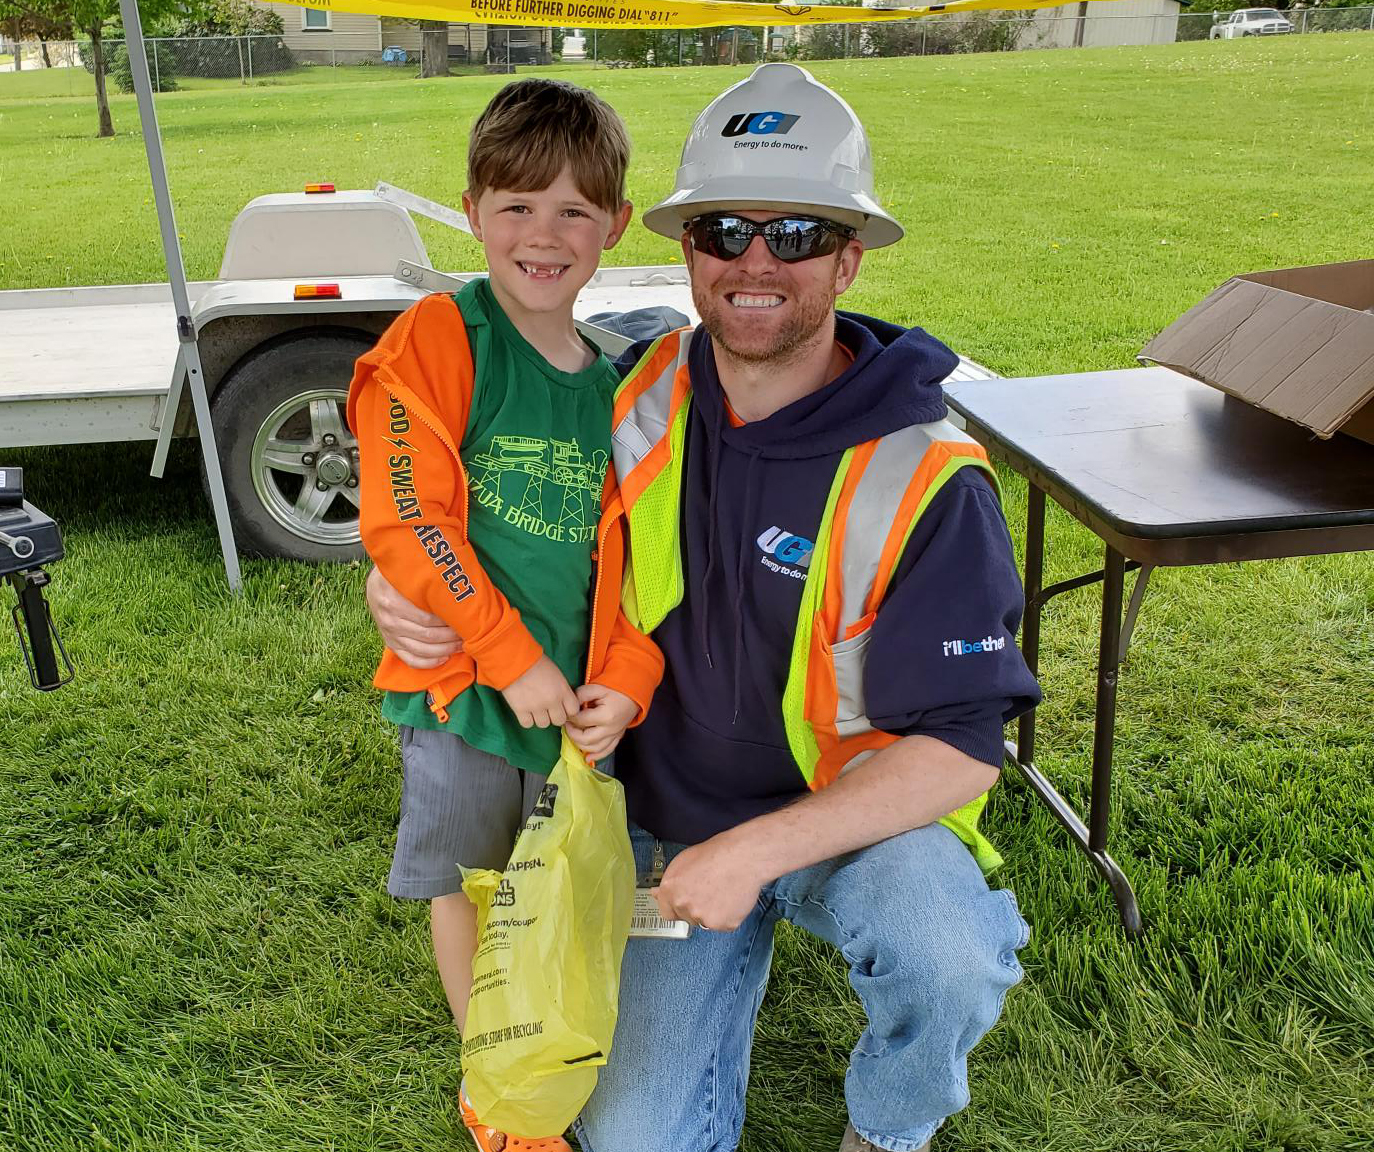 UGI field employee with child at an event